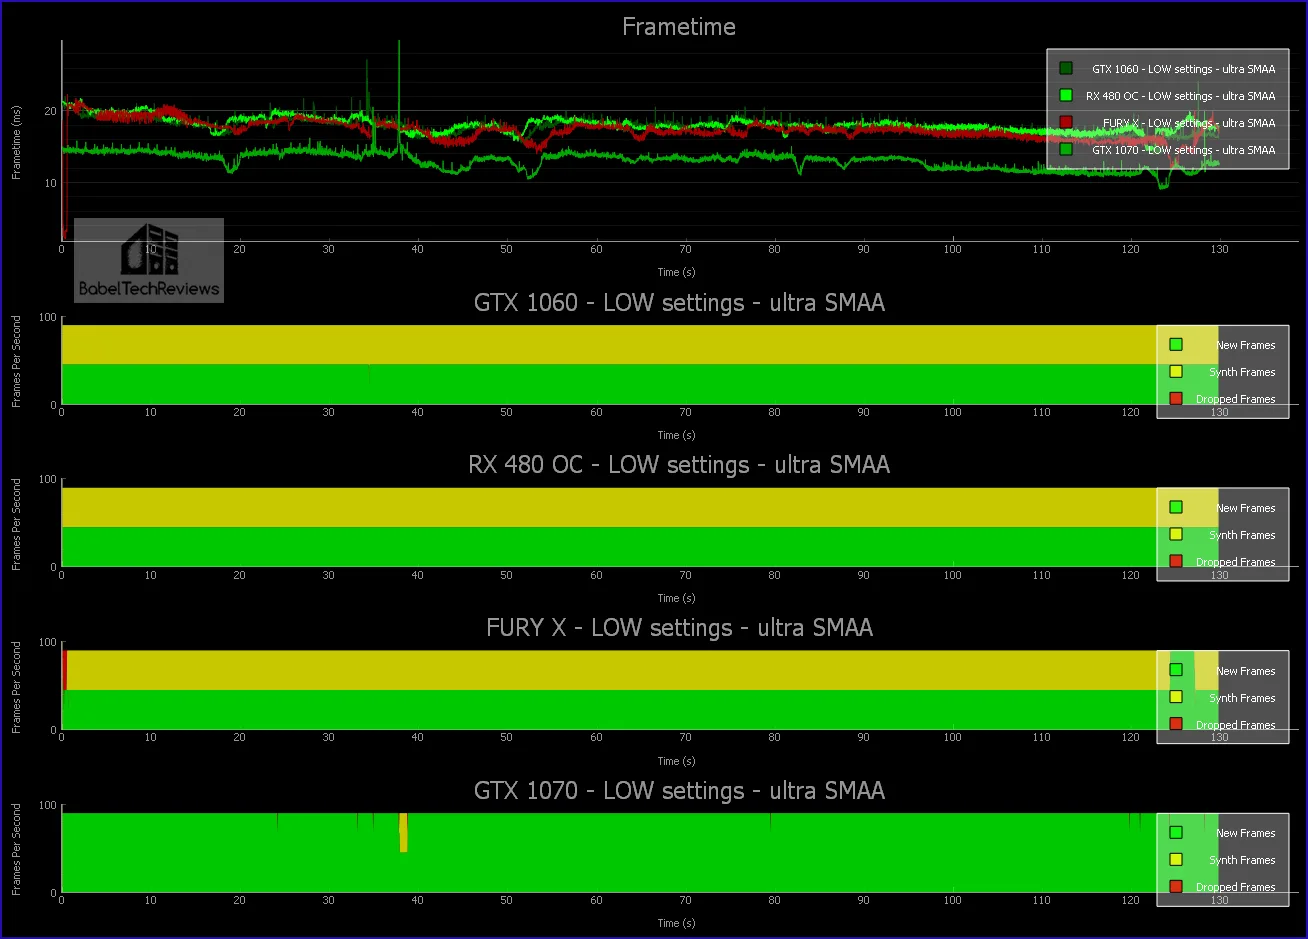 project cars 2 frametime chart low settings